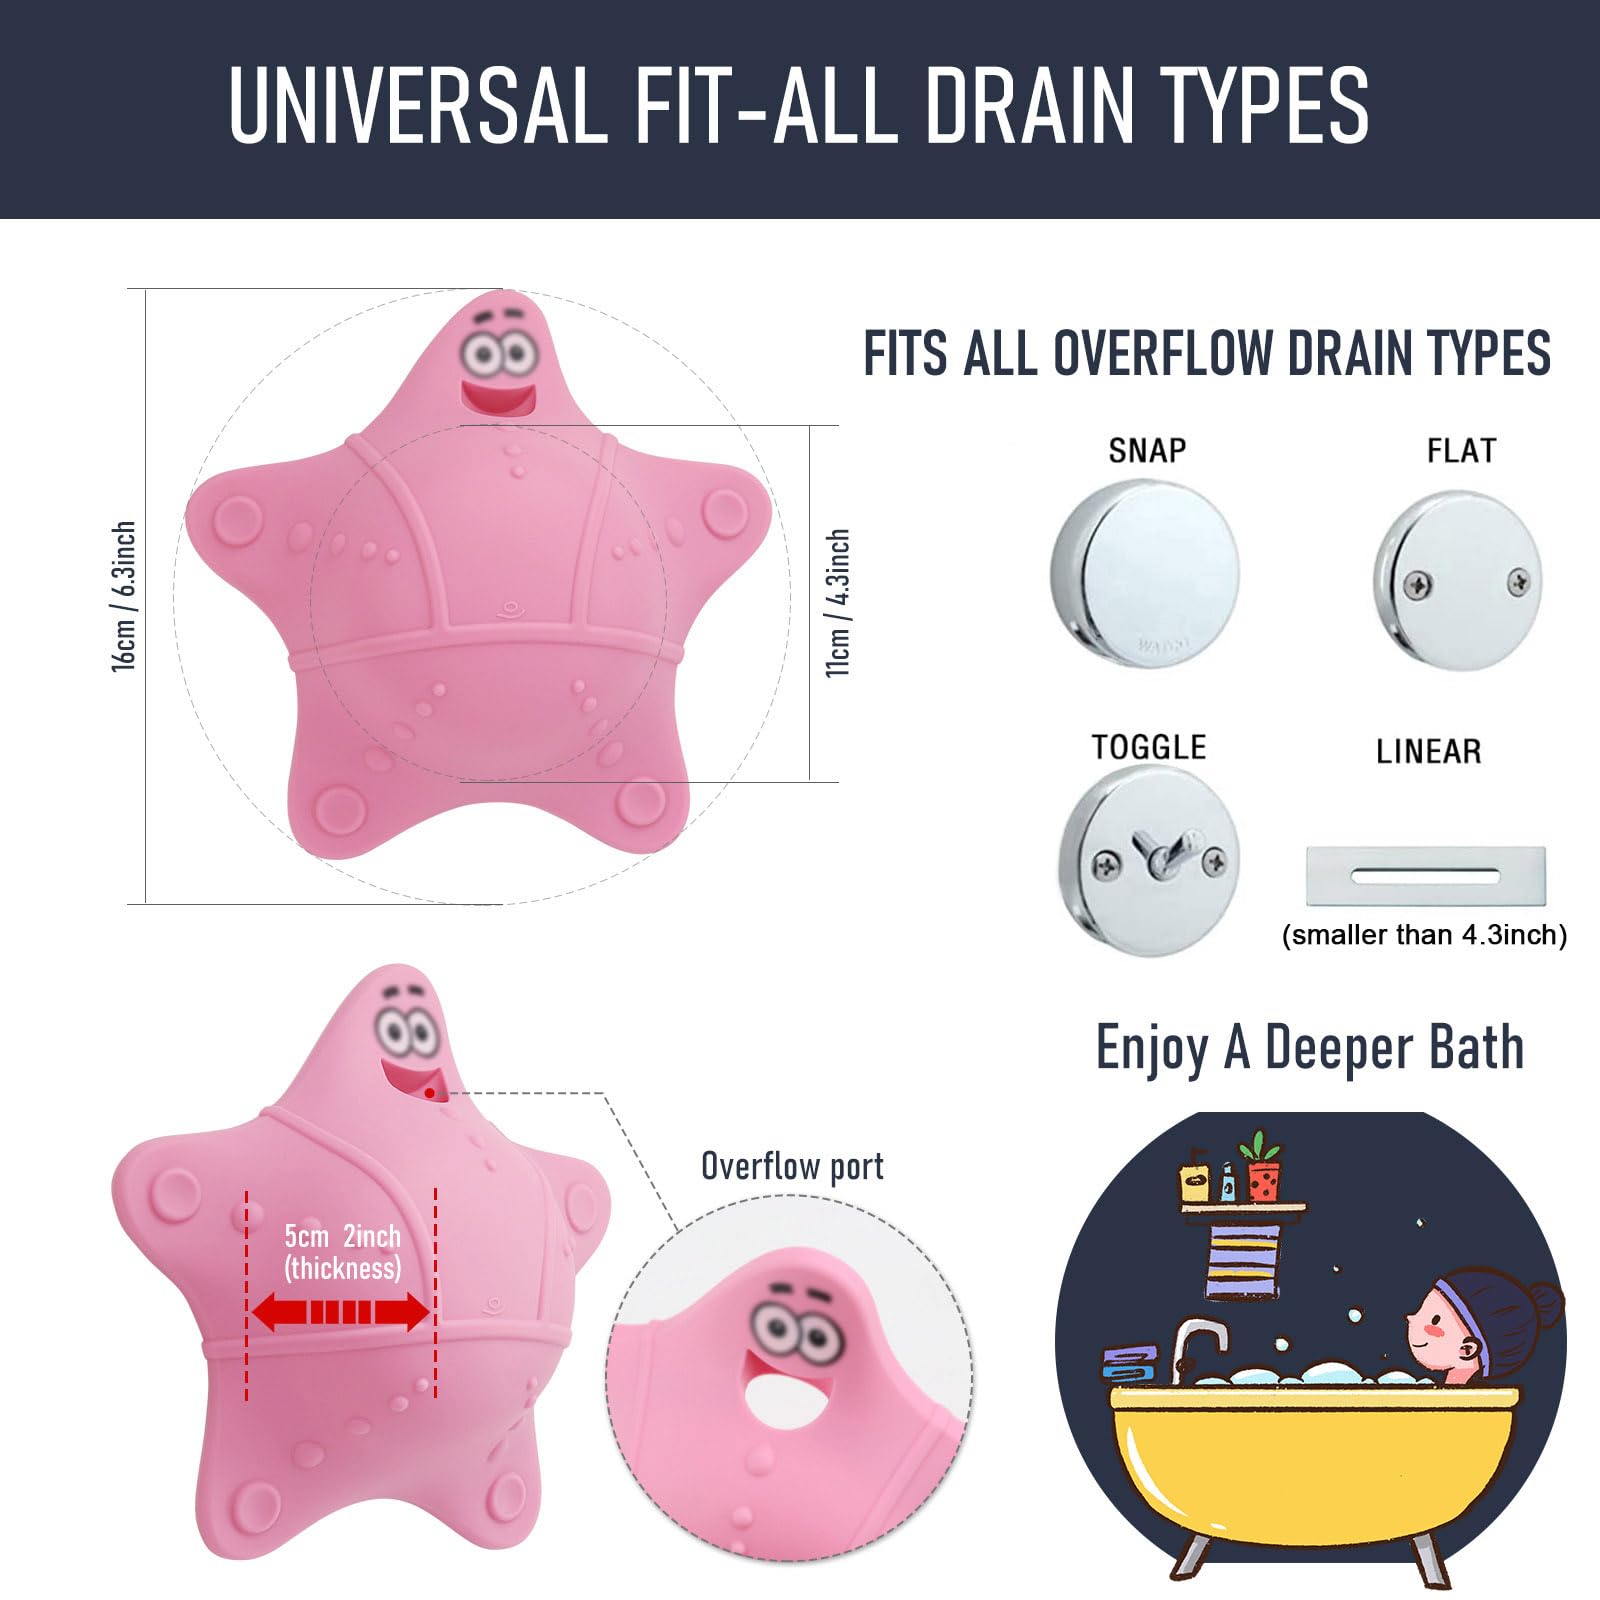 Bathtub Overflow Drain Cover, Bath Accessories, Soak Bath Overflow Drain Cover, Silicone Bath Tub Drain Plug with 5 Suction Cups, Adds Inches of Water for Deeper Bath, Tub Overflow Drain Stopper(Pink)